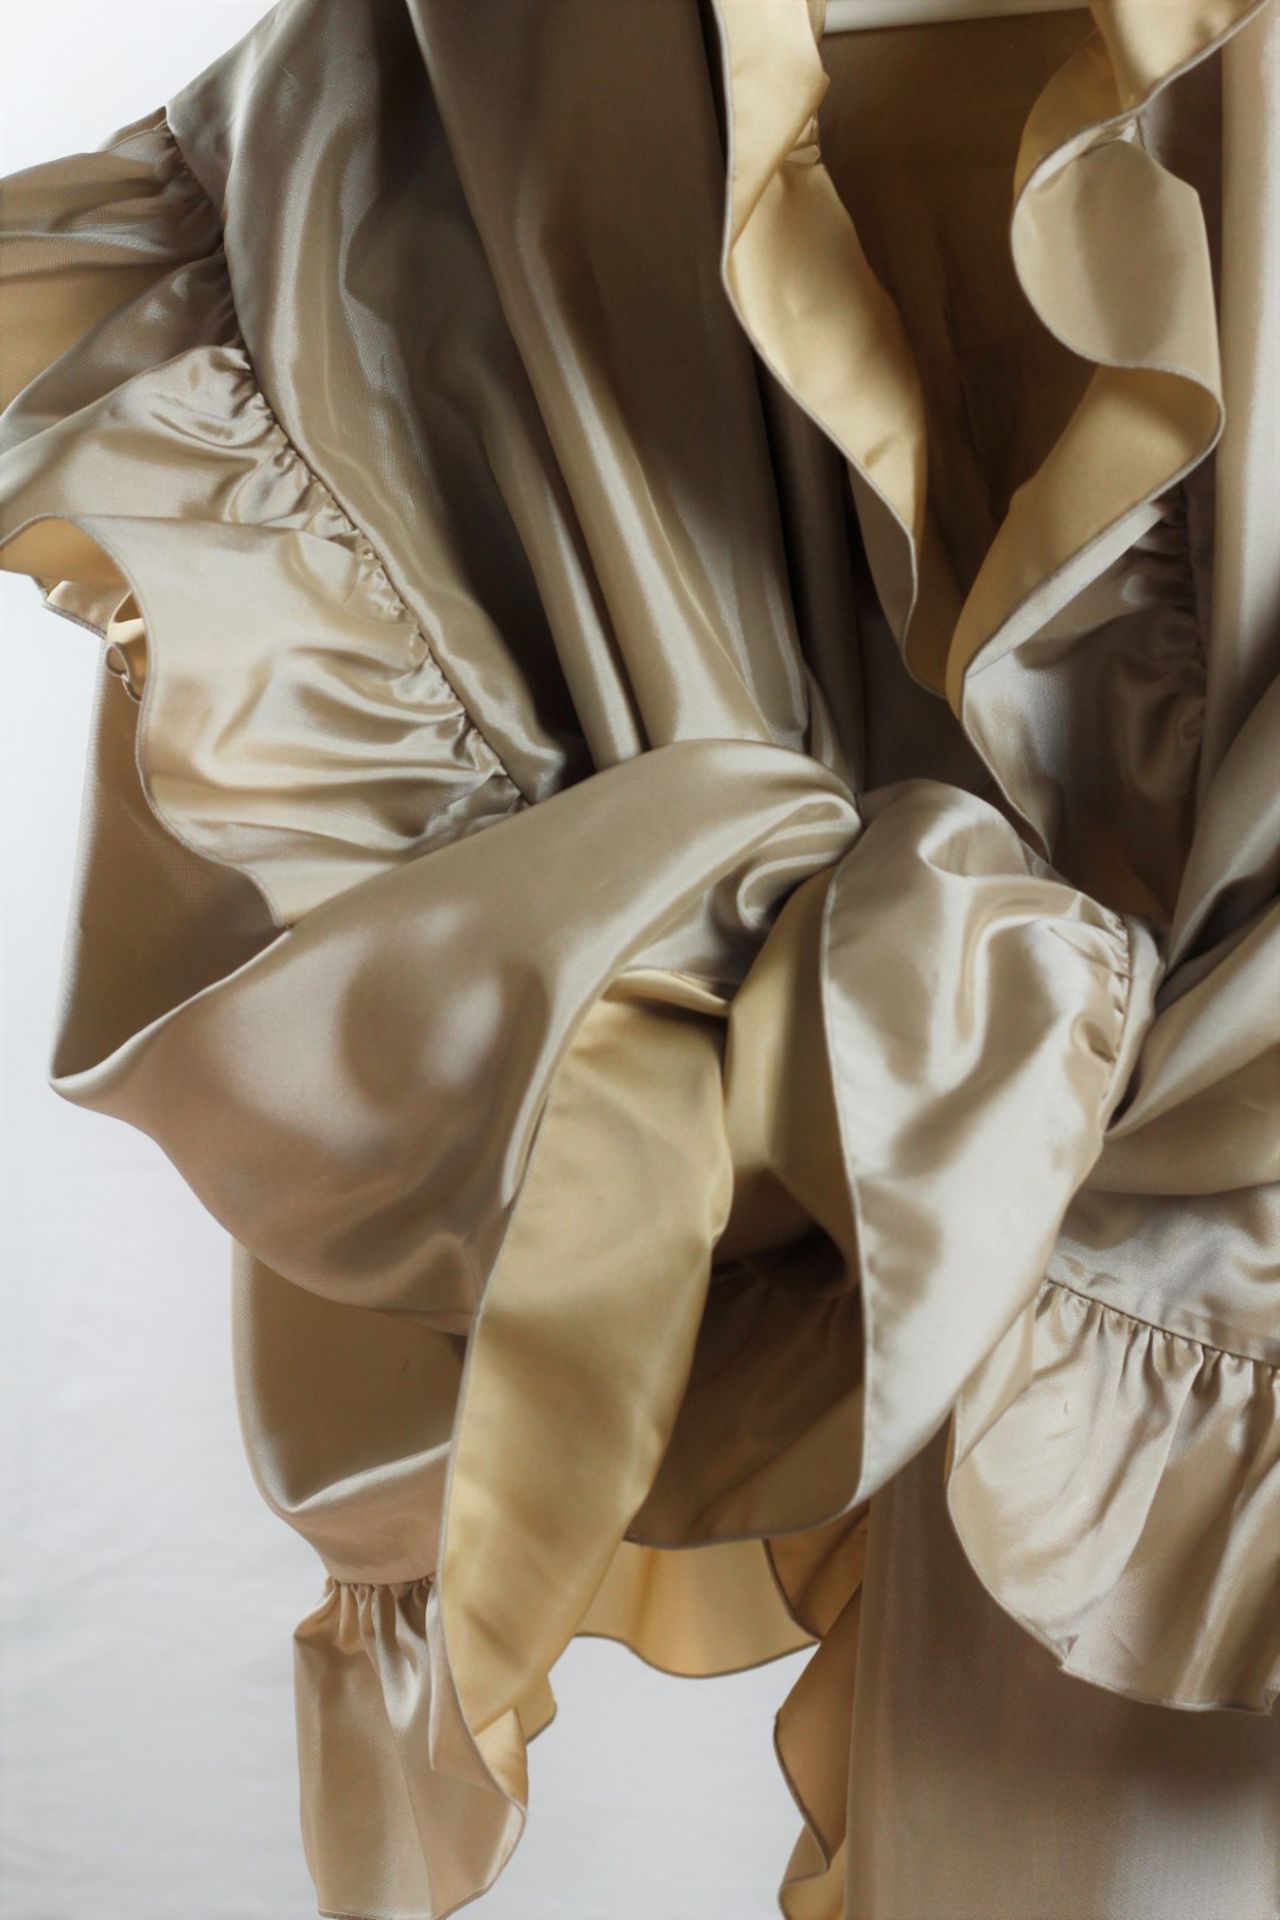 1 x Boutique Le Duc Champagne Wrap/Shawl - From a High End Clothing Boutique In The - Image 3 of 8